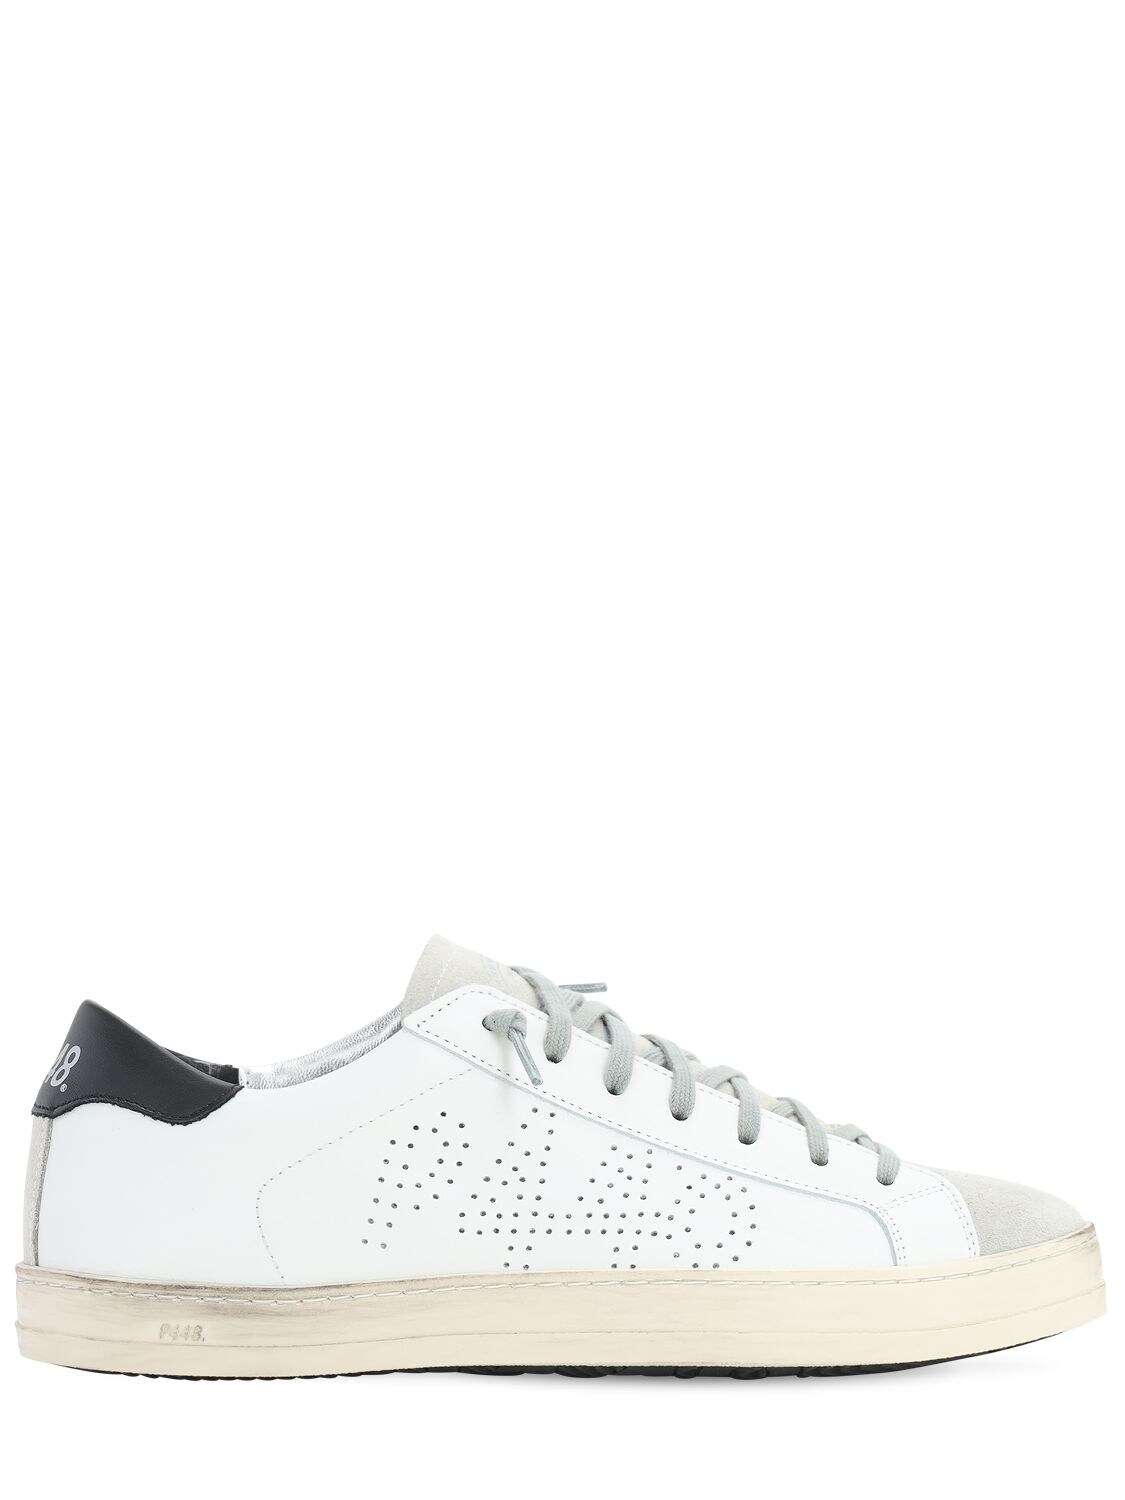 P448 JOHN LEATHER & SUEDE LOW-TOP SNEAKERS,71IHLL001-V0HJL0DCTES1